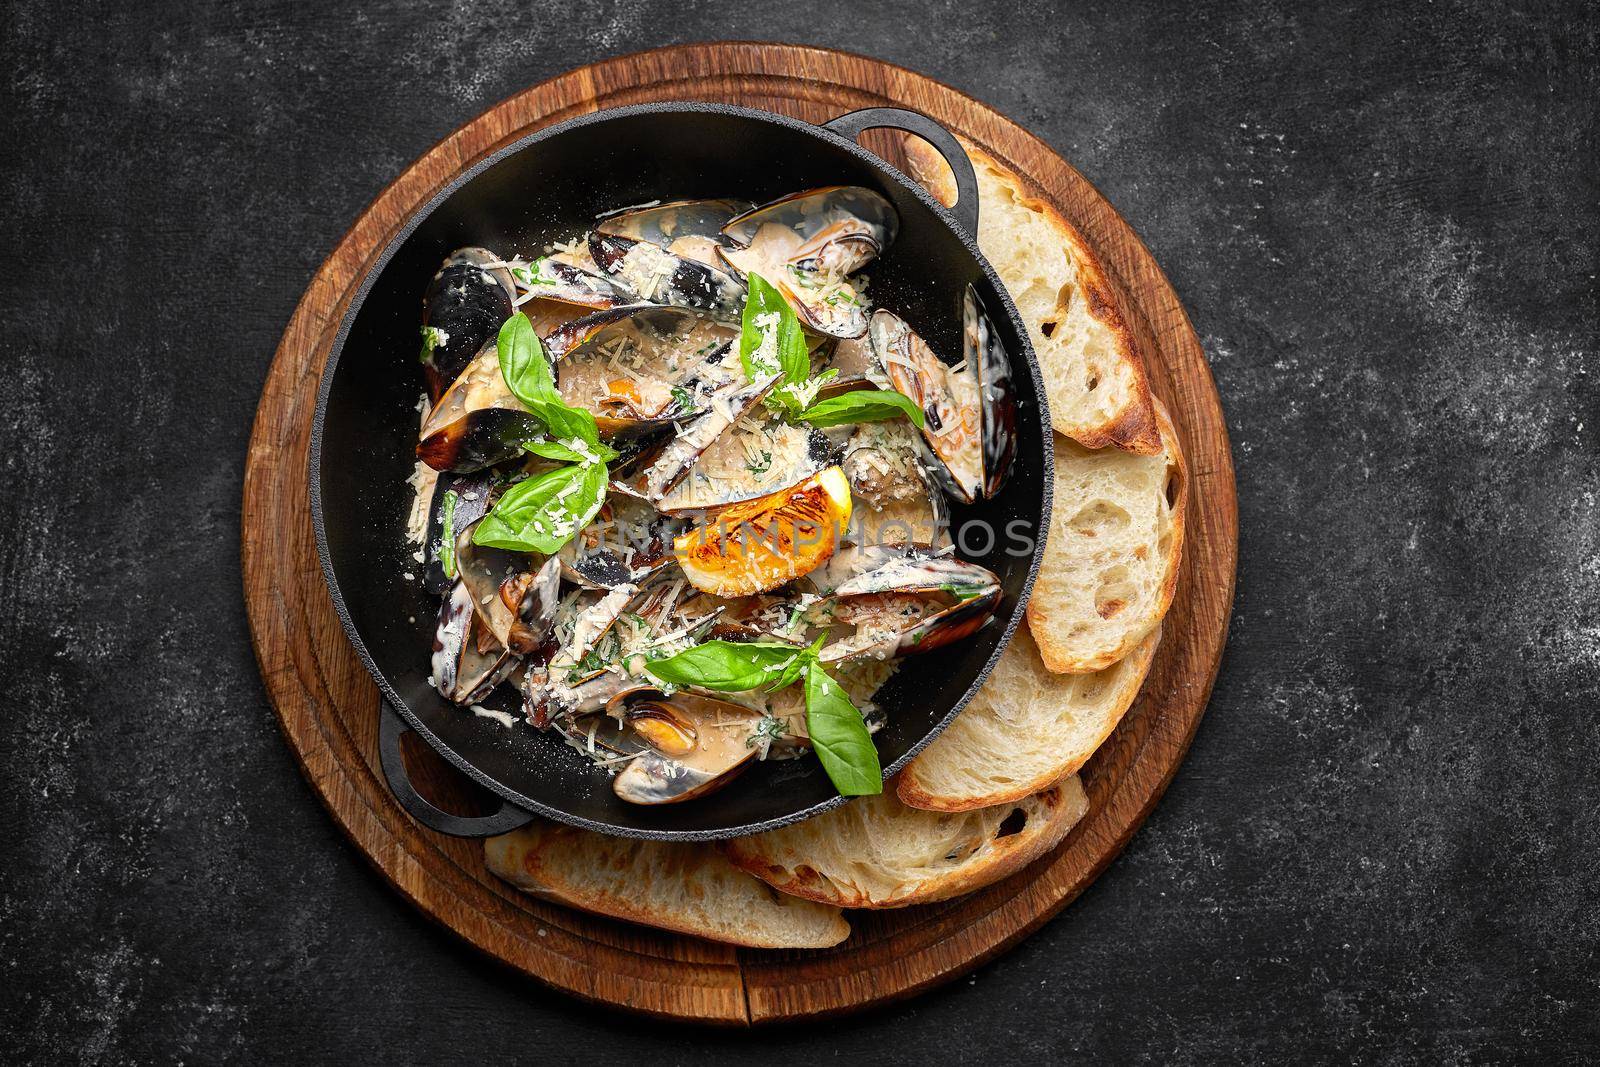 Cooked mussels in a skillet with cheese and basil leaves, on a wooden board, on a dark background